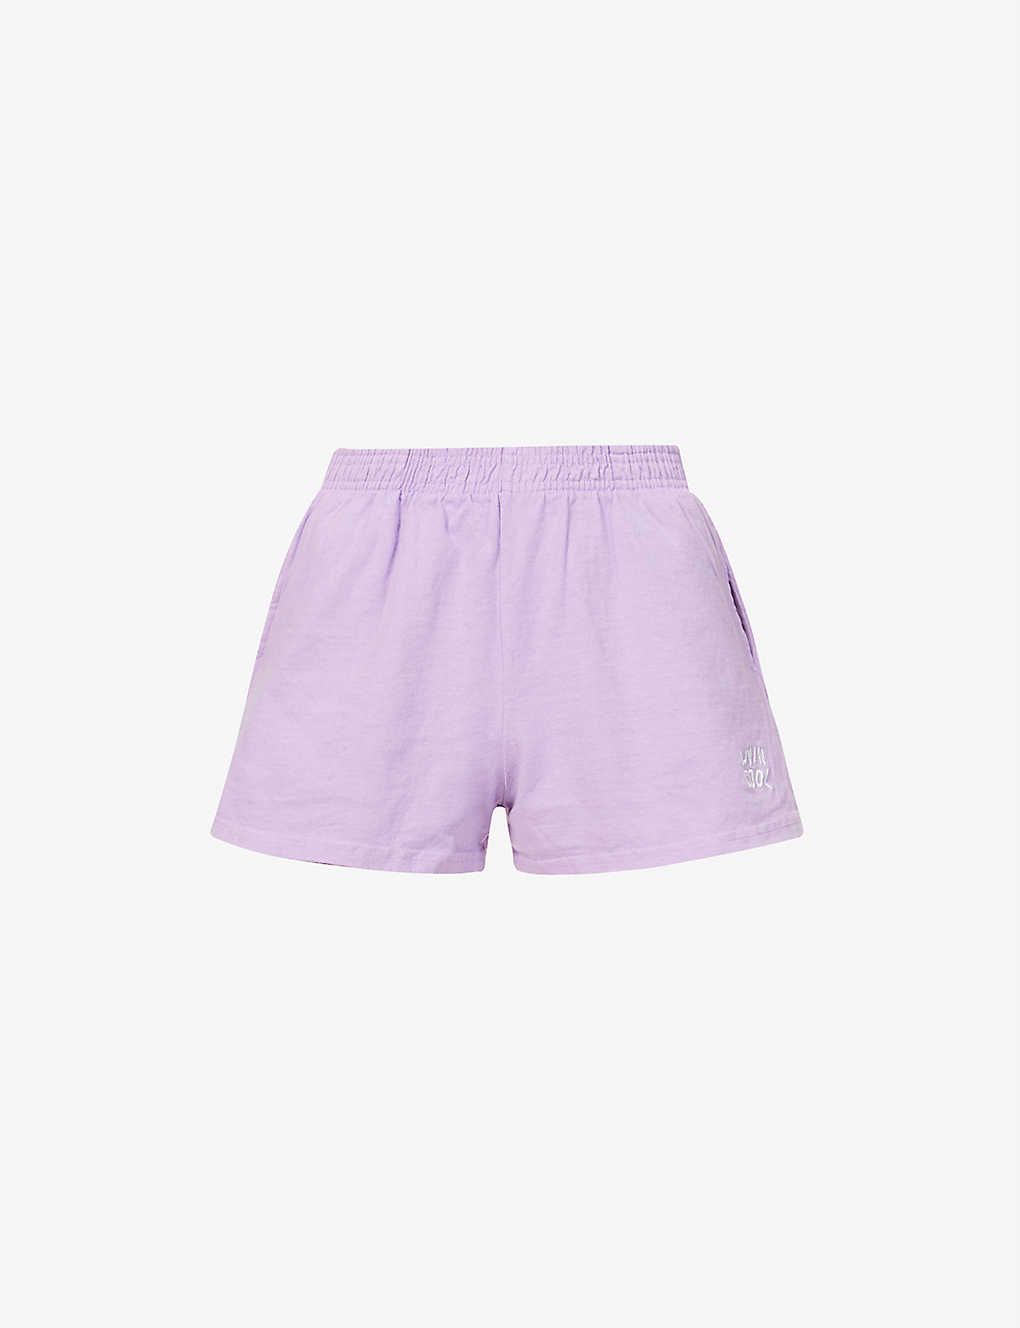 Brand-embroidered cotton-jersey shorts | Selfridges